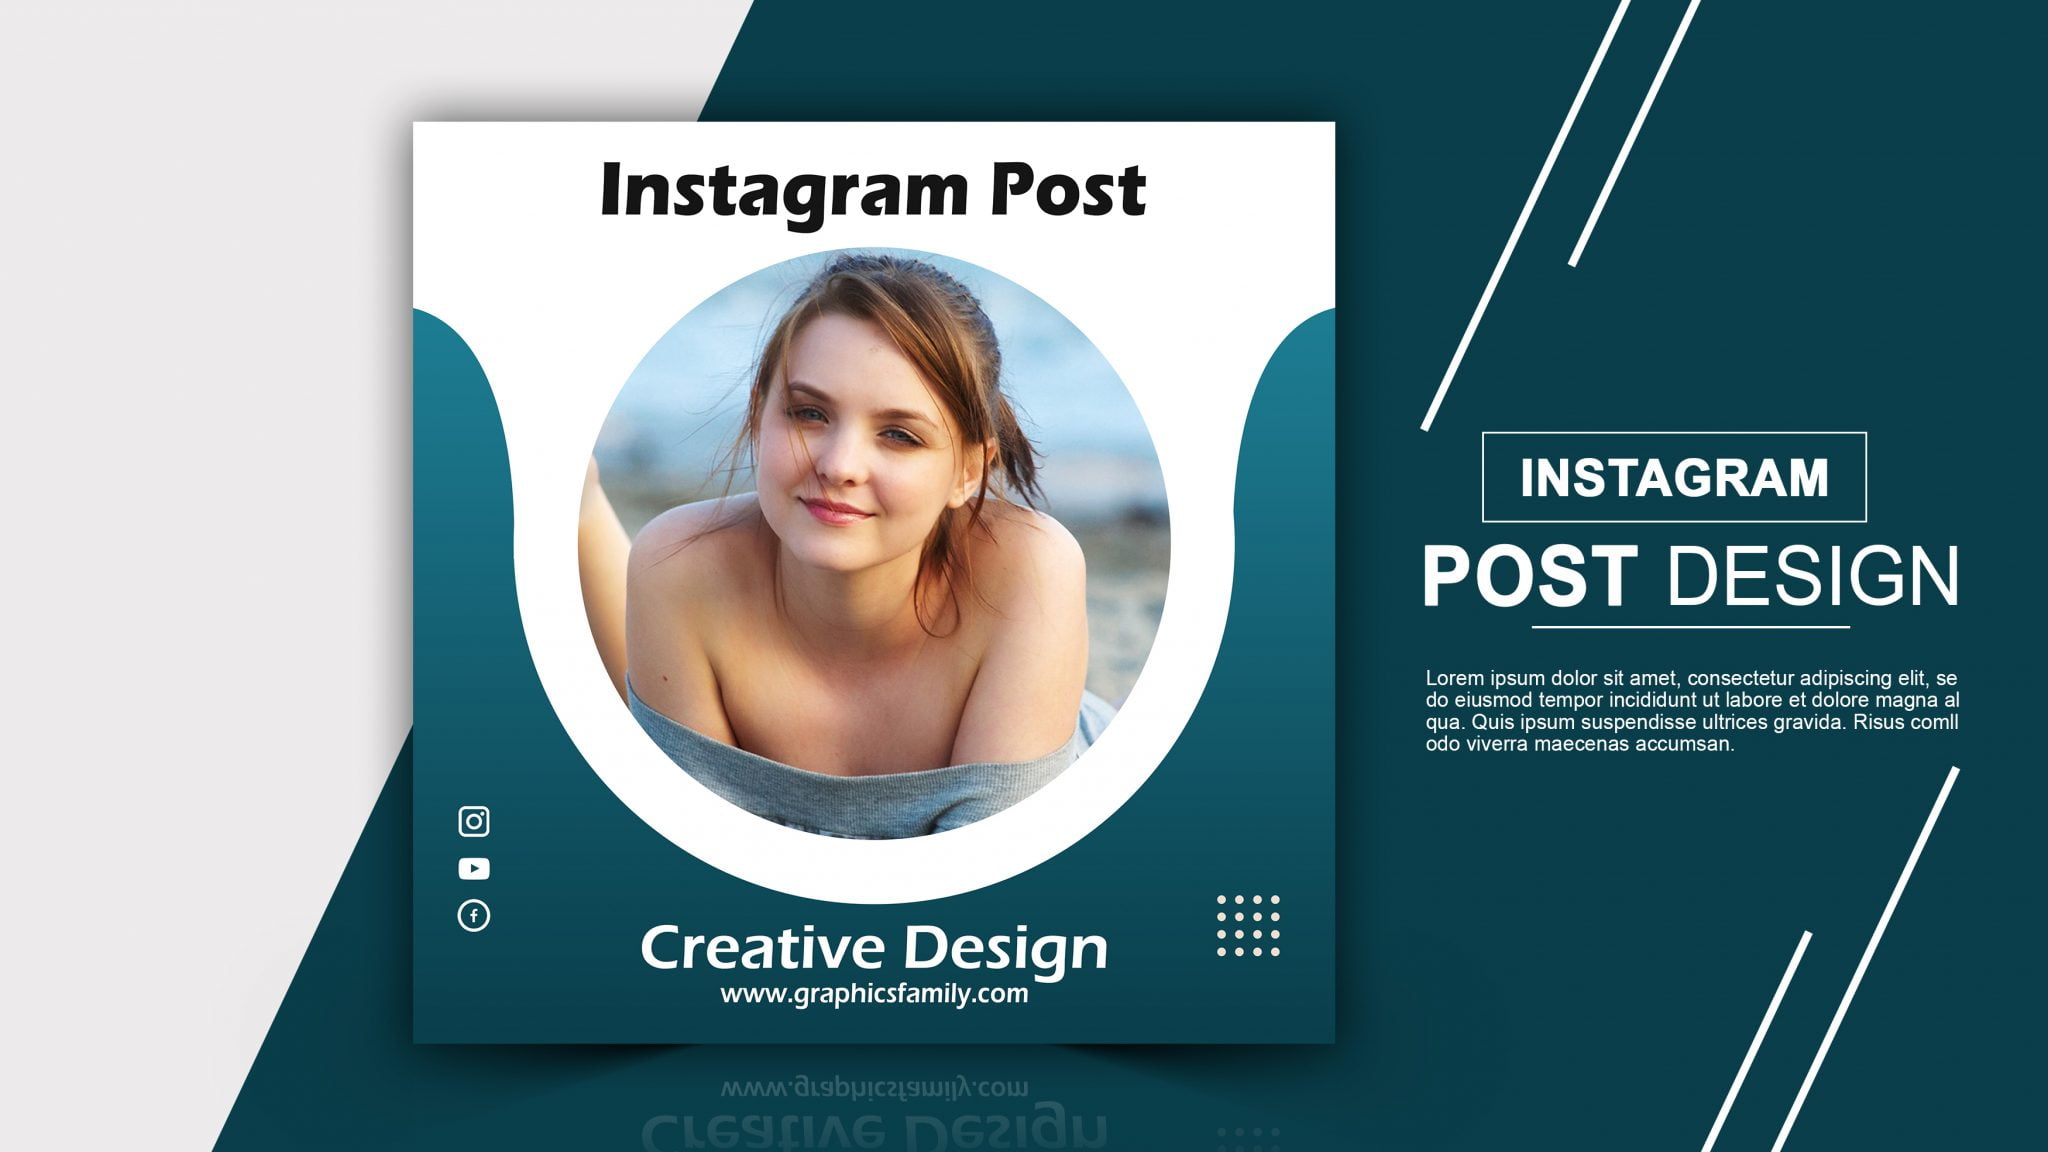 Free Instagram Post Design Instagram Business Template Banners Pngtree Commercial Premium The